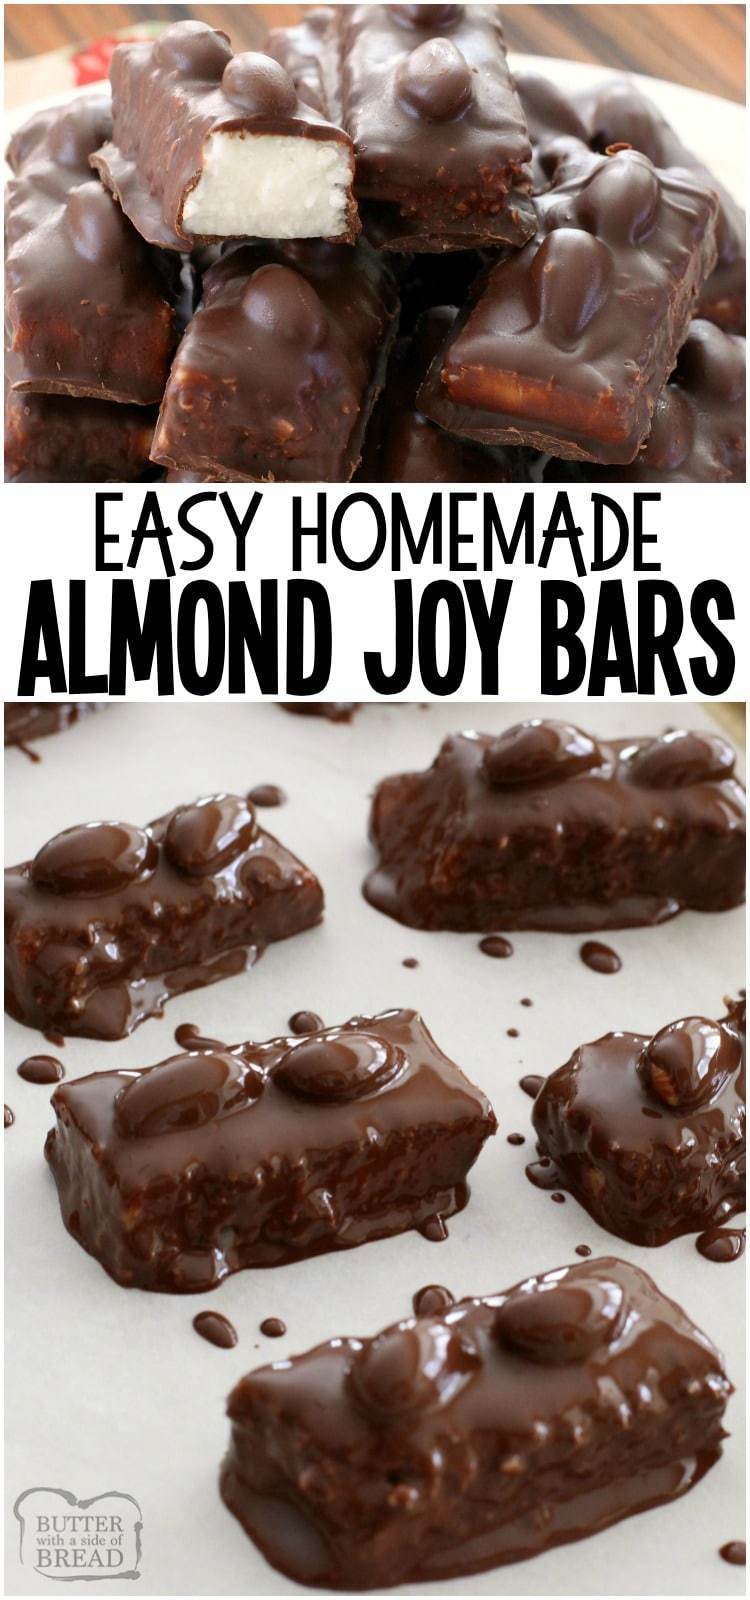 Homemade Almond Joy Bars with sweet coconut, sugar, coconut oil & dark chocolate. Topped with almonds & more chocolate for a melt-in-your-mouth treat. #almondjoy #chocolate #coconut #candy #homemade #dessert #recipe from BUTTER WITH A SIDE OF BREAD